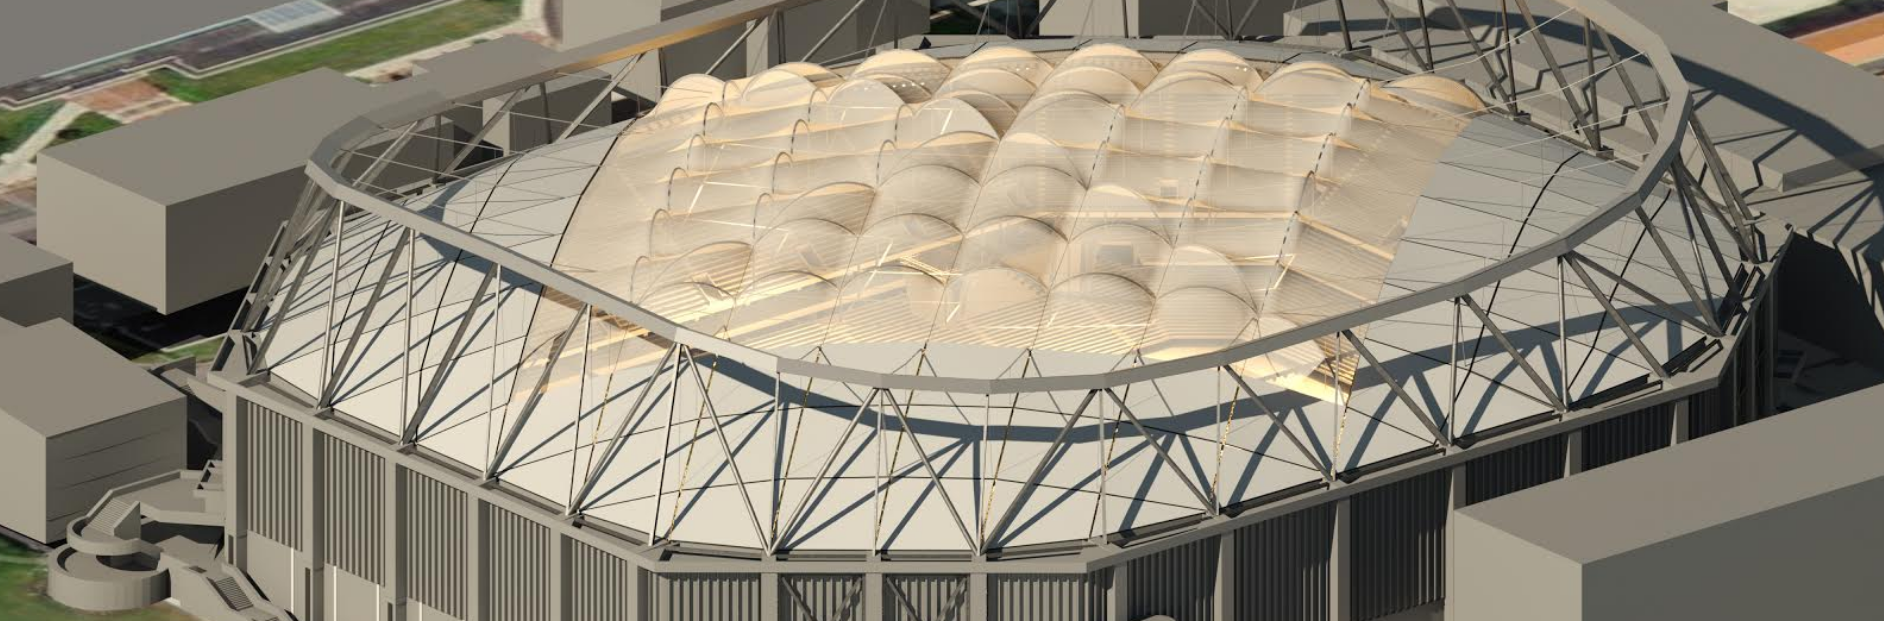 New Dome Roof Rendering.png